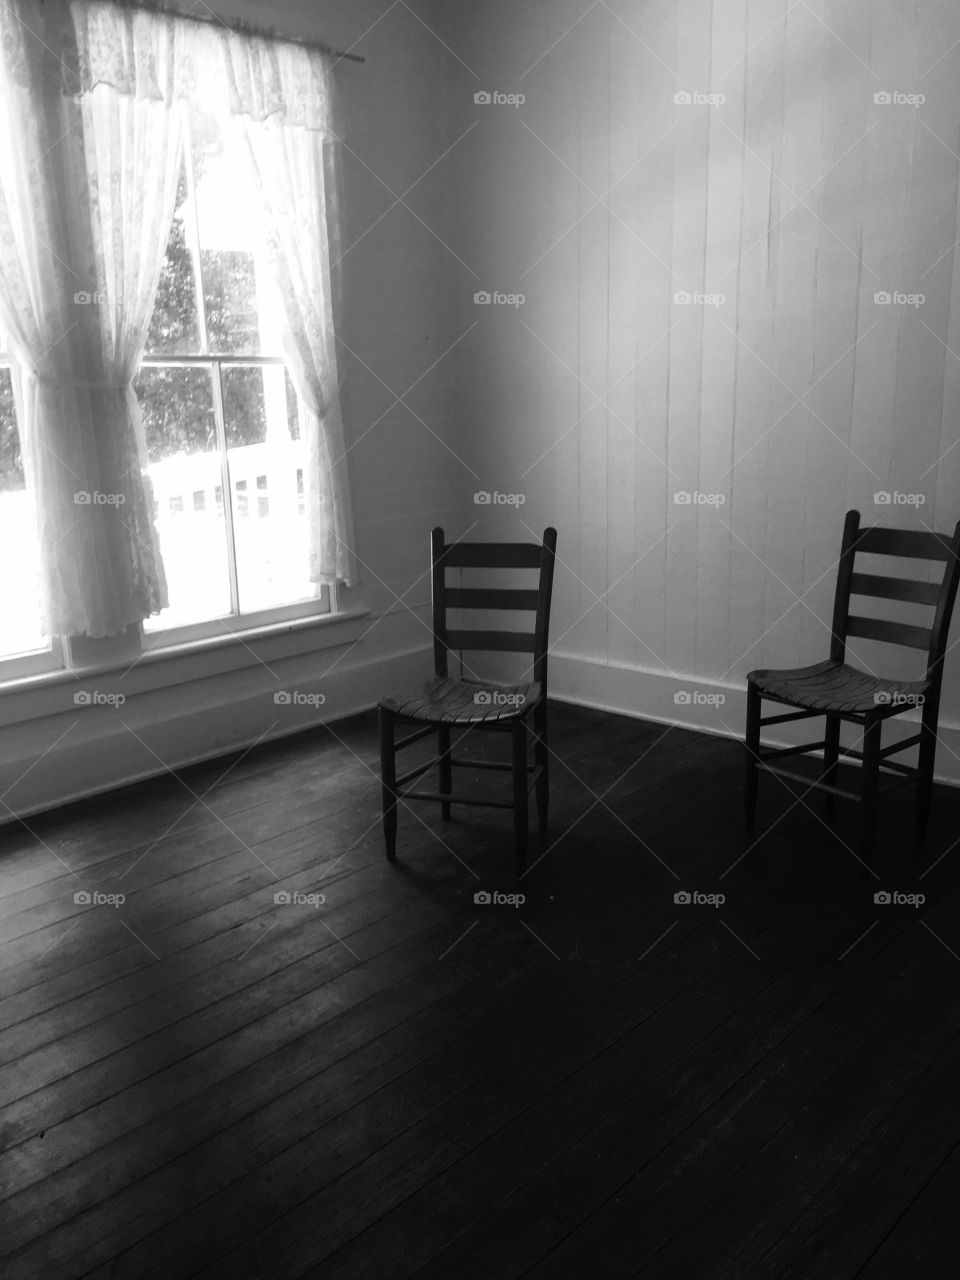 Two chairs to give a creepy vibe with the curtains open